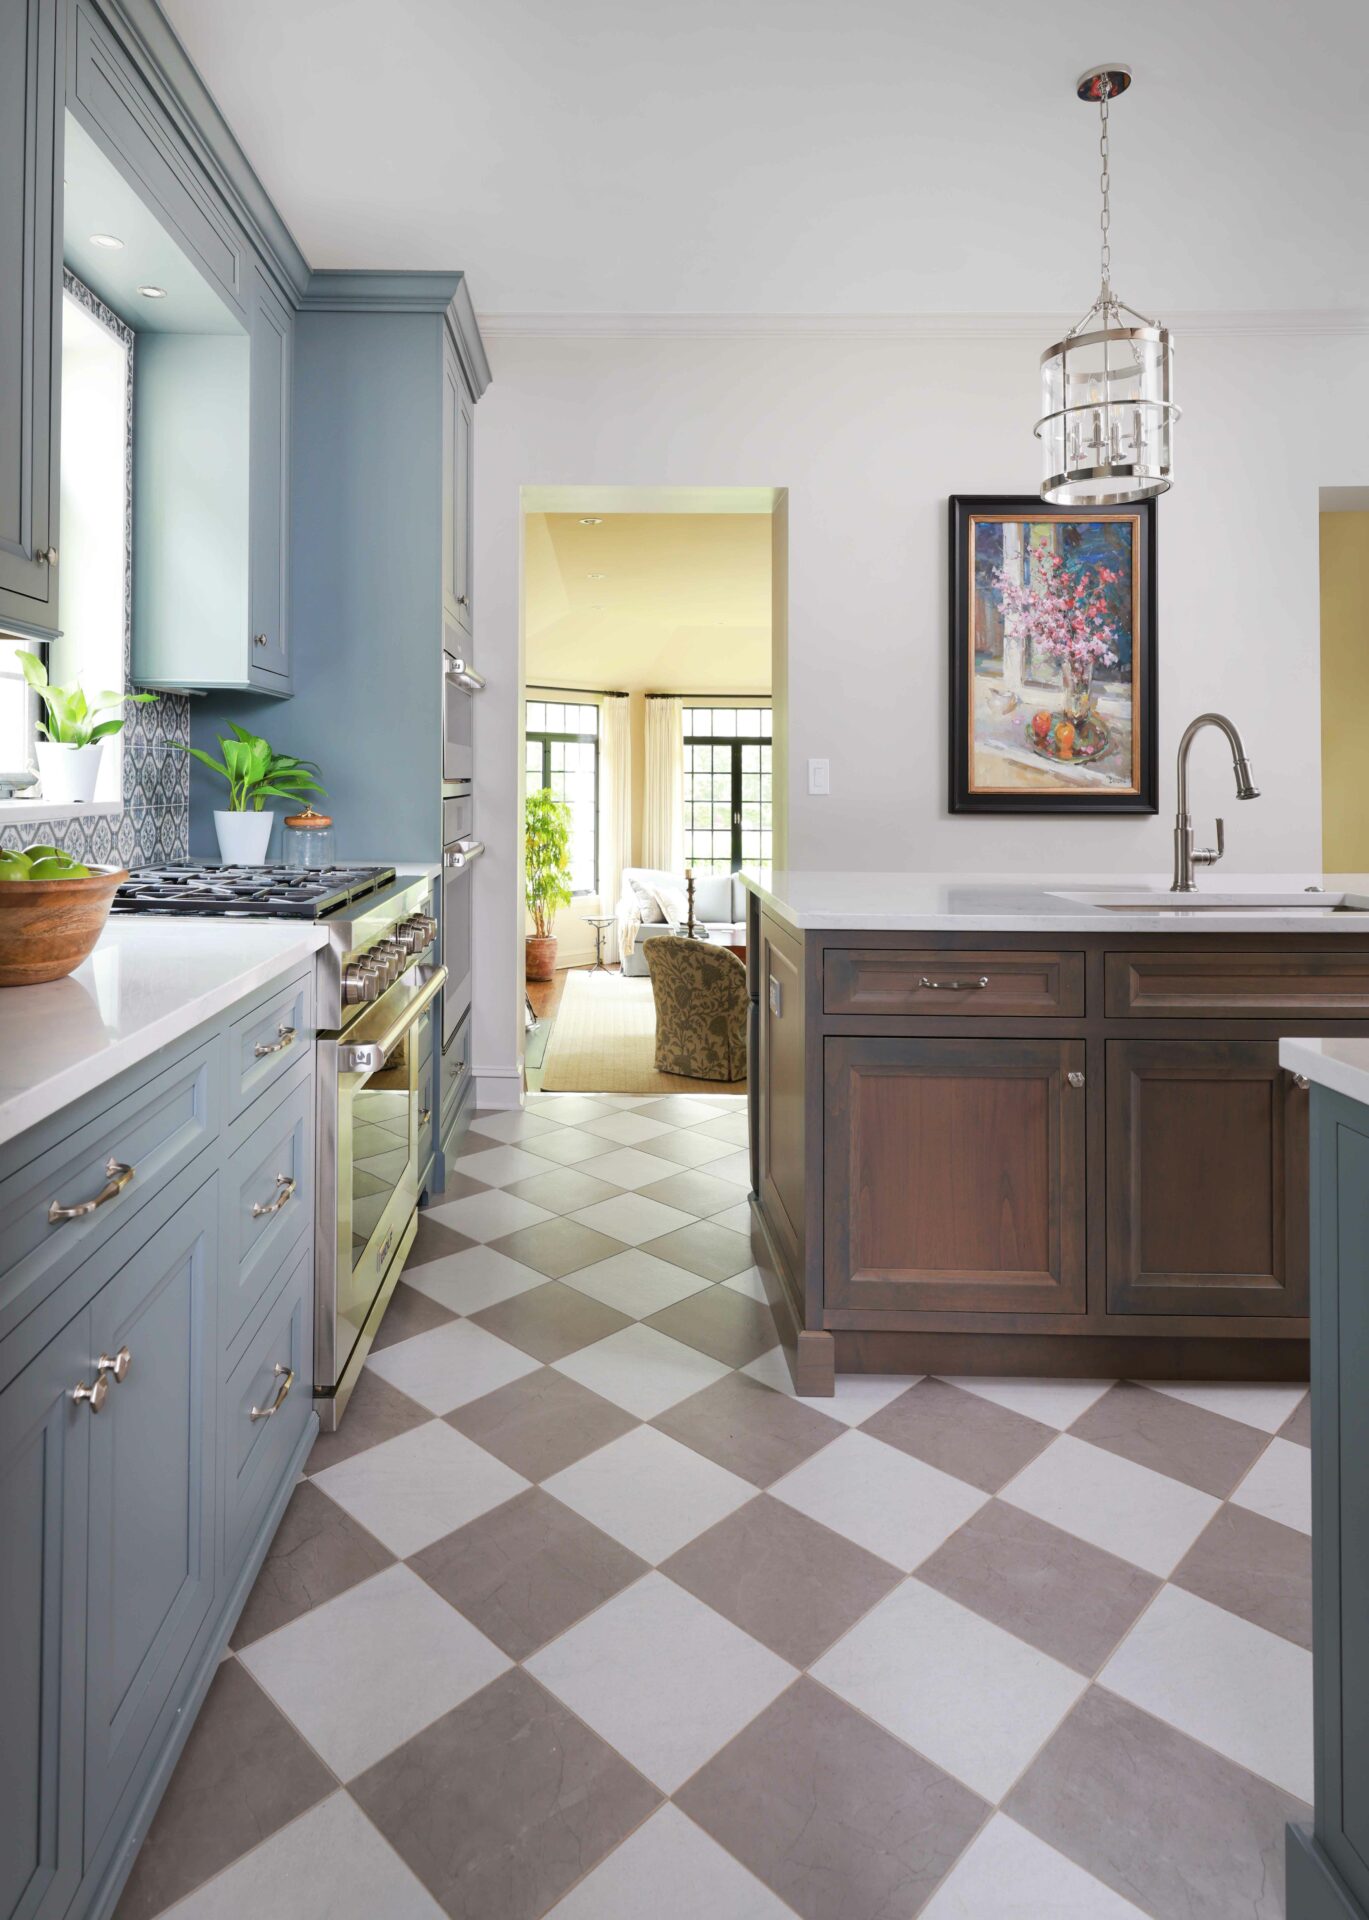 Gray painted cabinets and stained wood cabinets in a vintage inspired kitchen